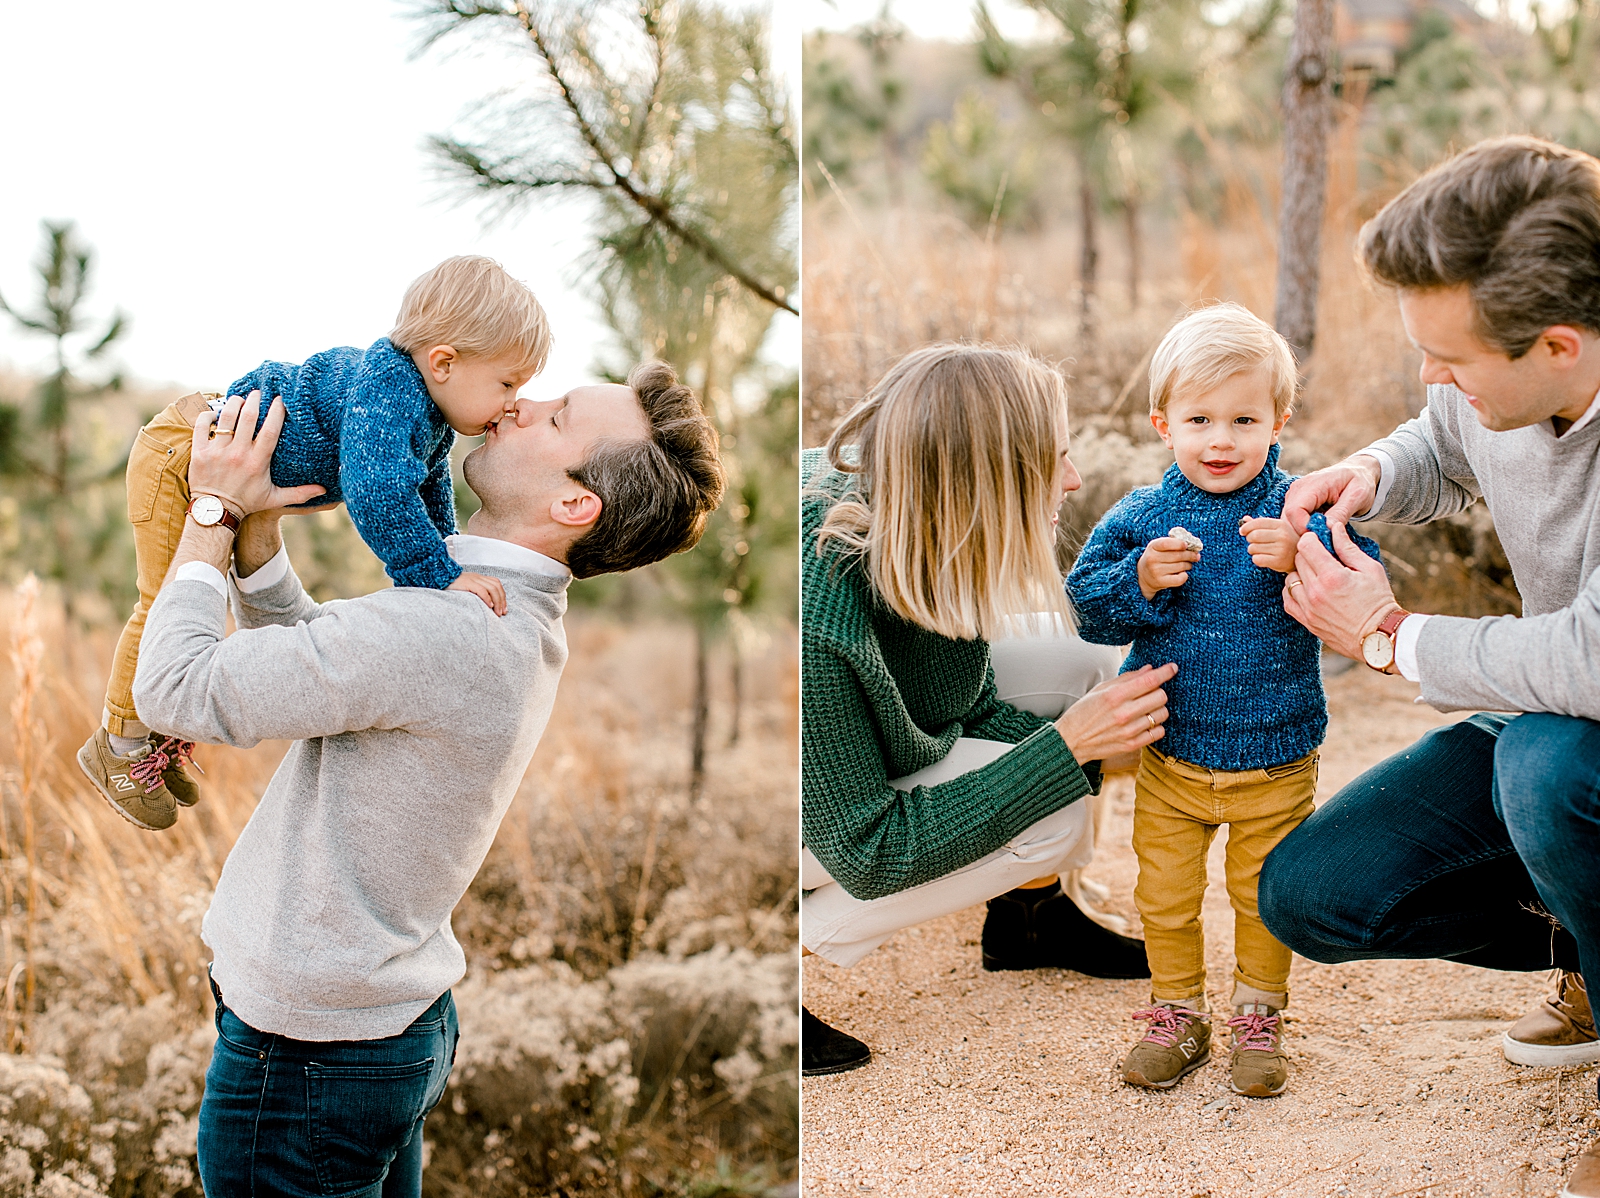 Greenville Outdoor natural Light Family Photographer